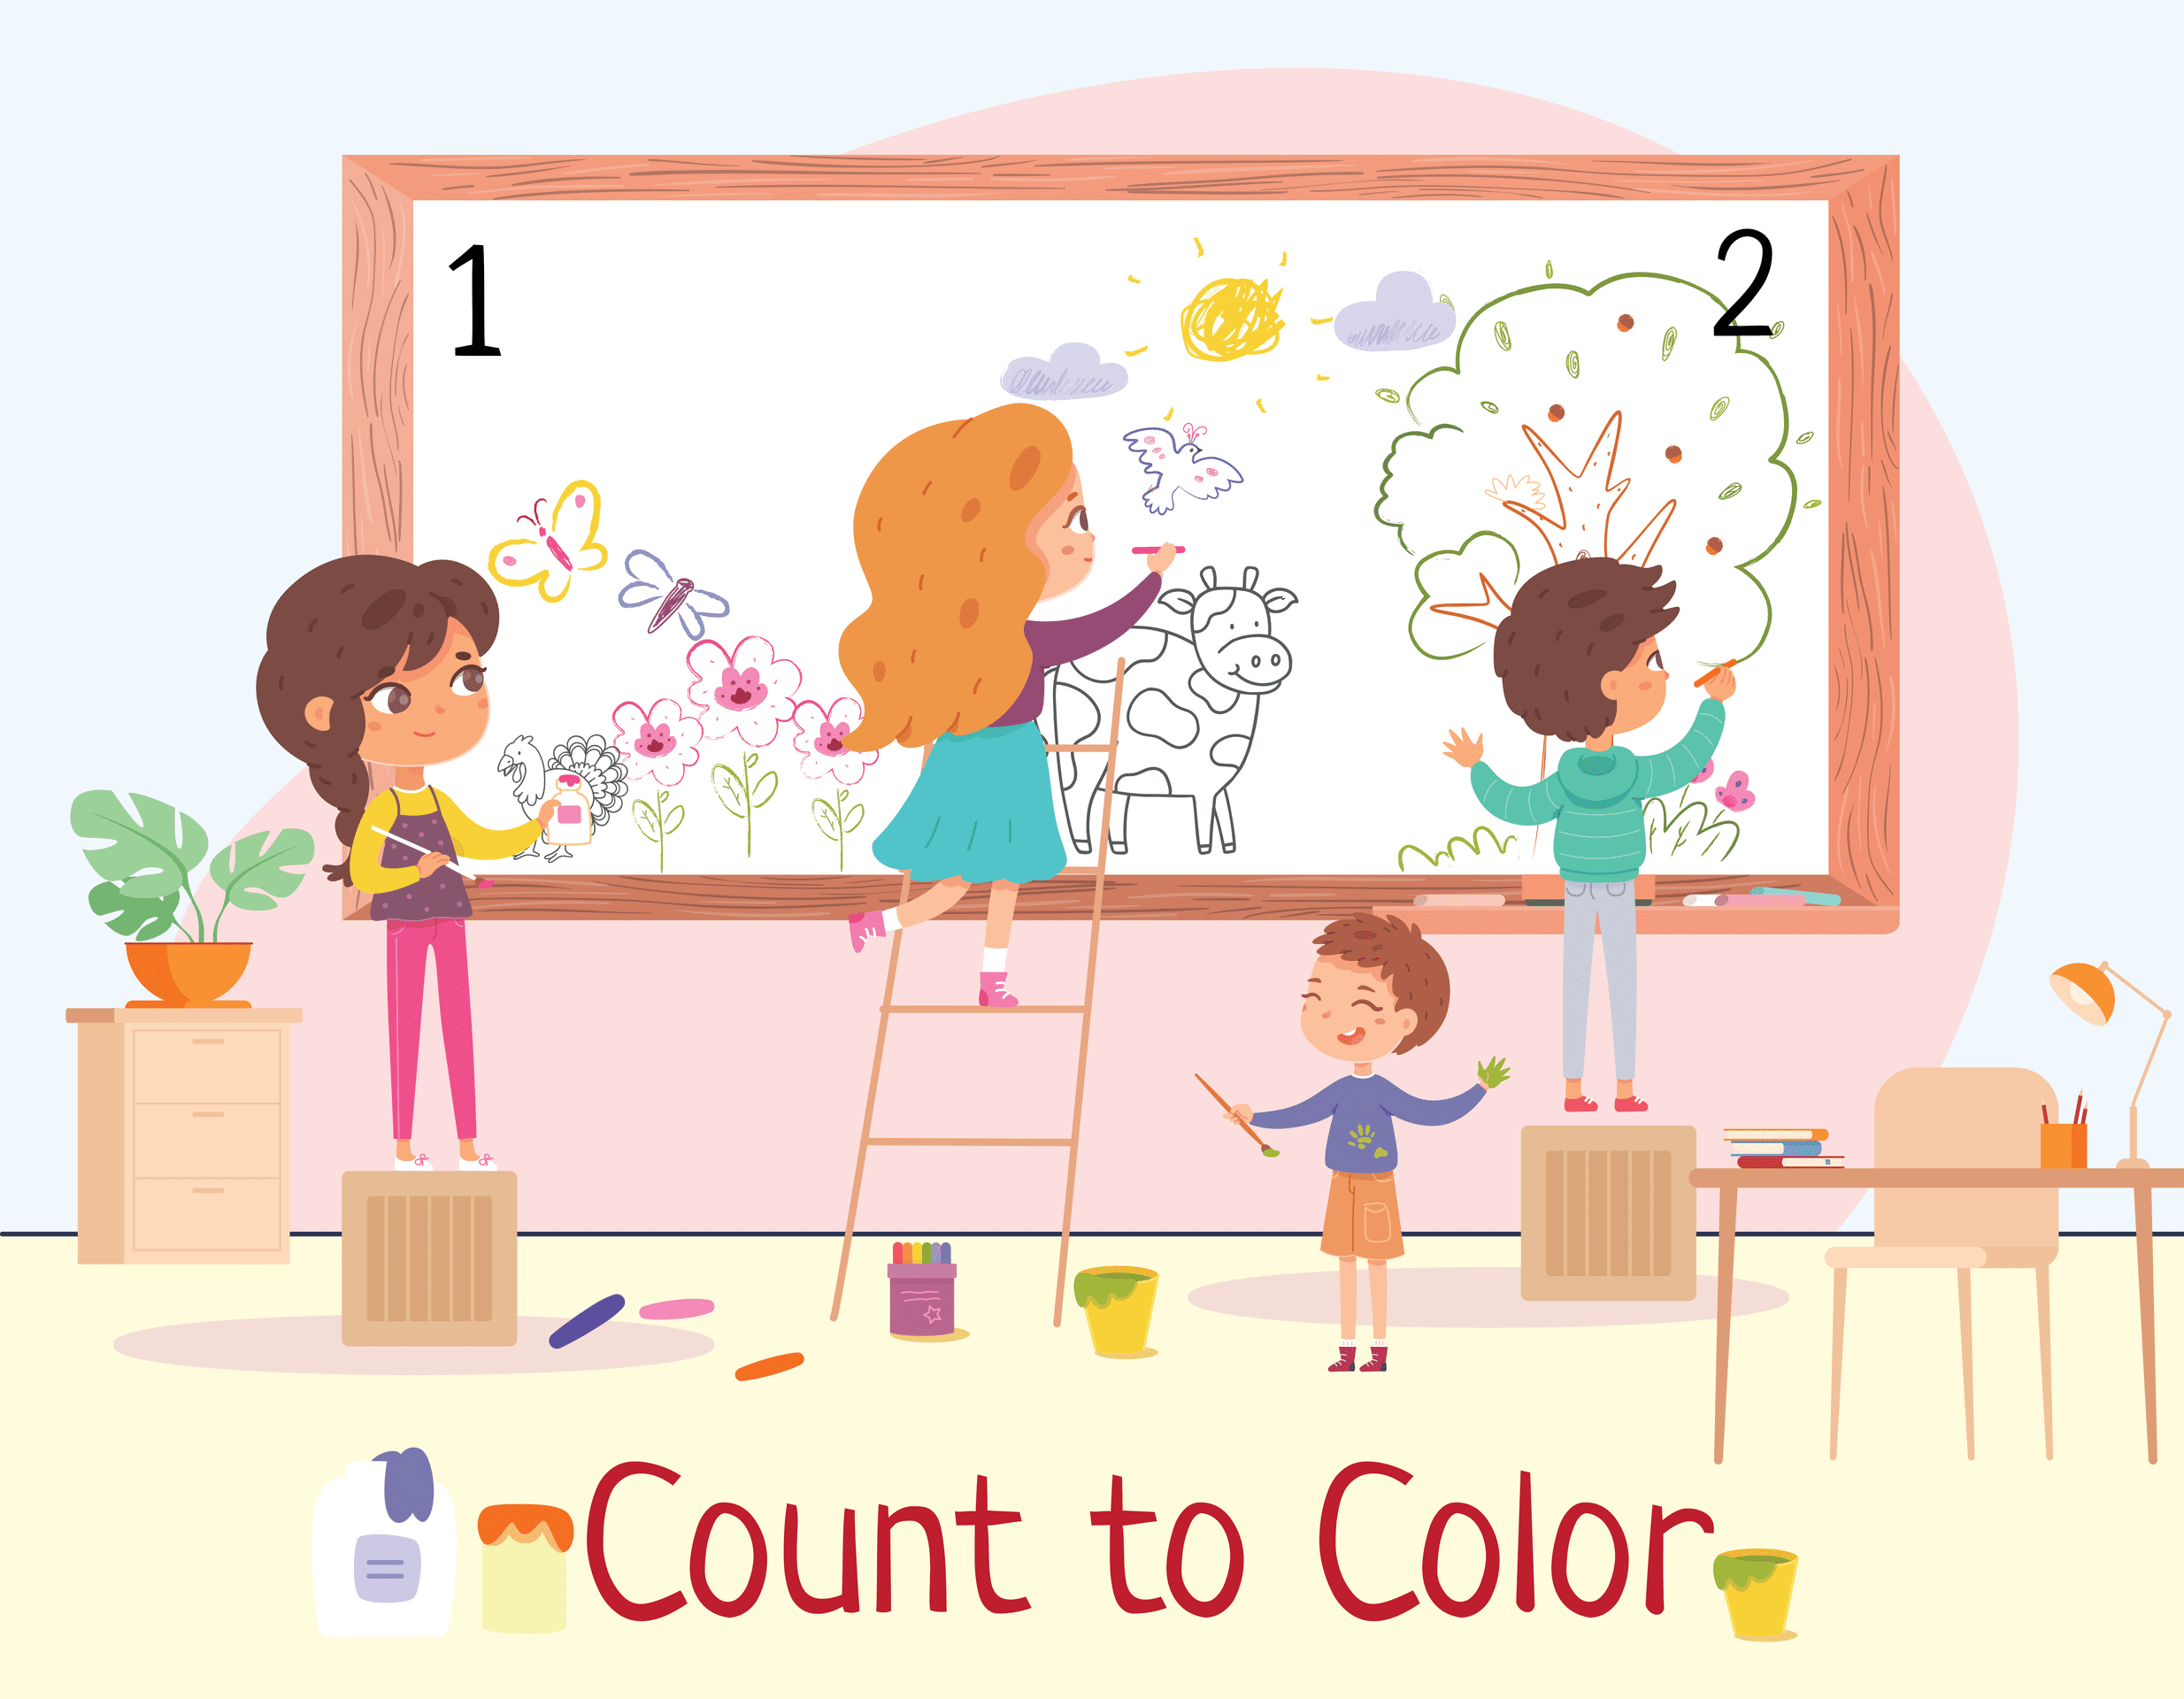 Counting Numbers to Color the Farm Animals